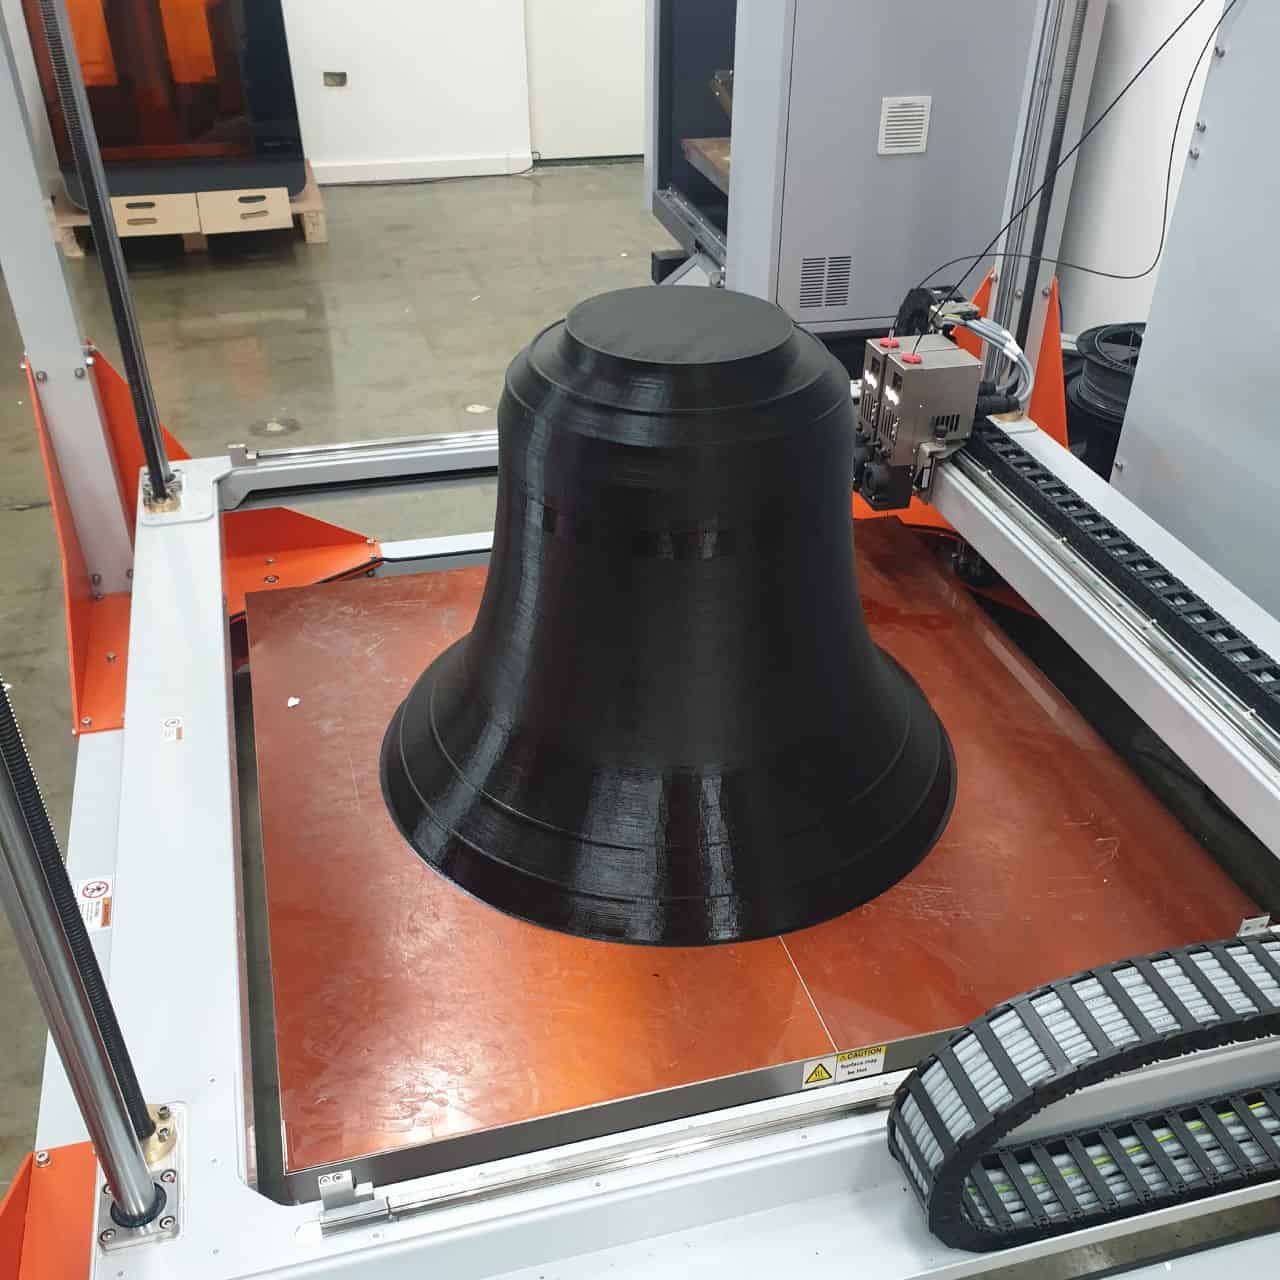 Large-Format 3D Printing Unlocks New Frequencies for Bell Casting